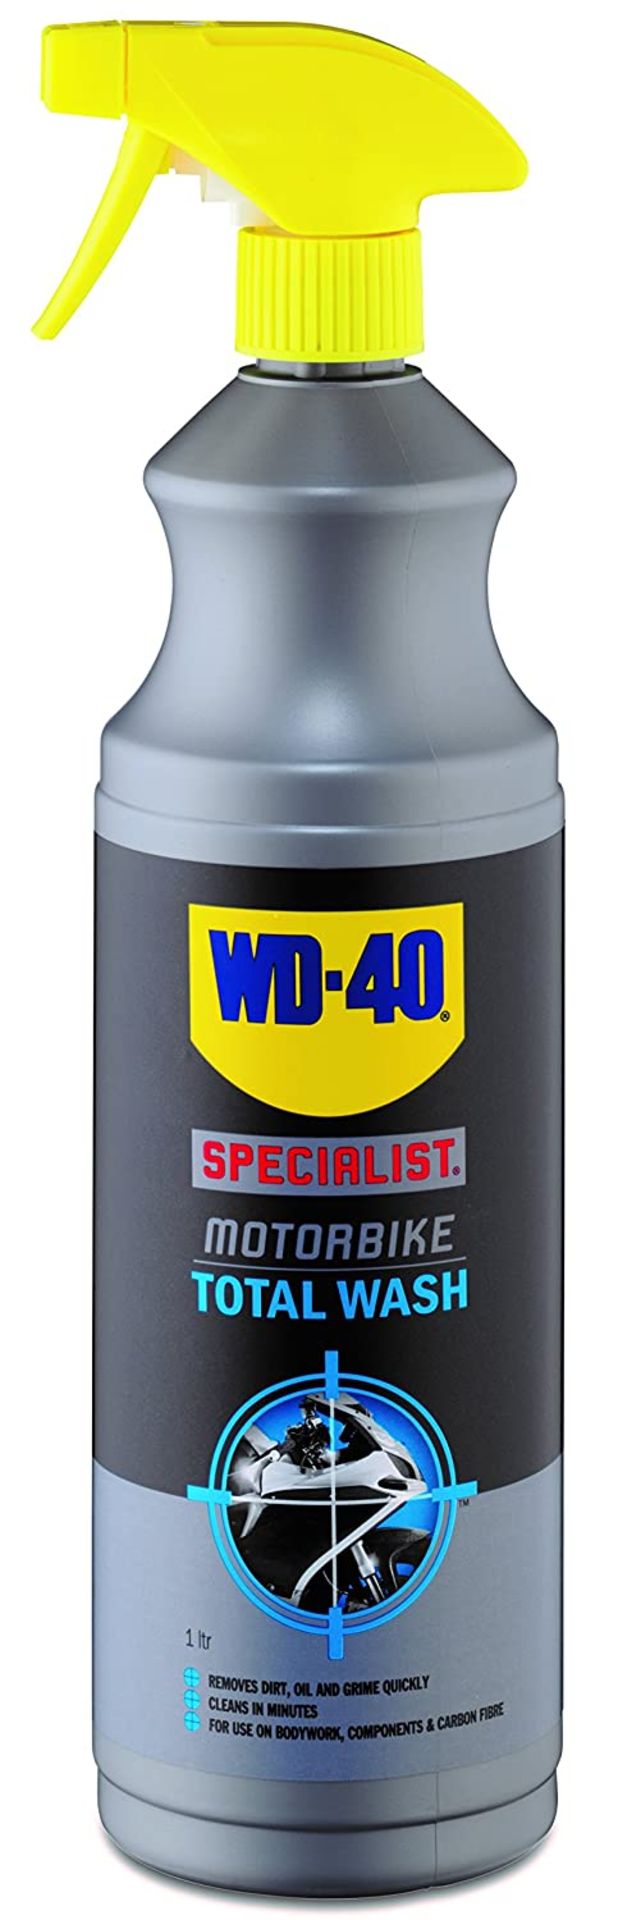 BRAND NEW 1L BOTTLE OF WD-40 MOTORBIKE TOTAL WASH